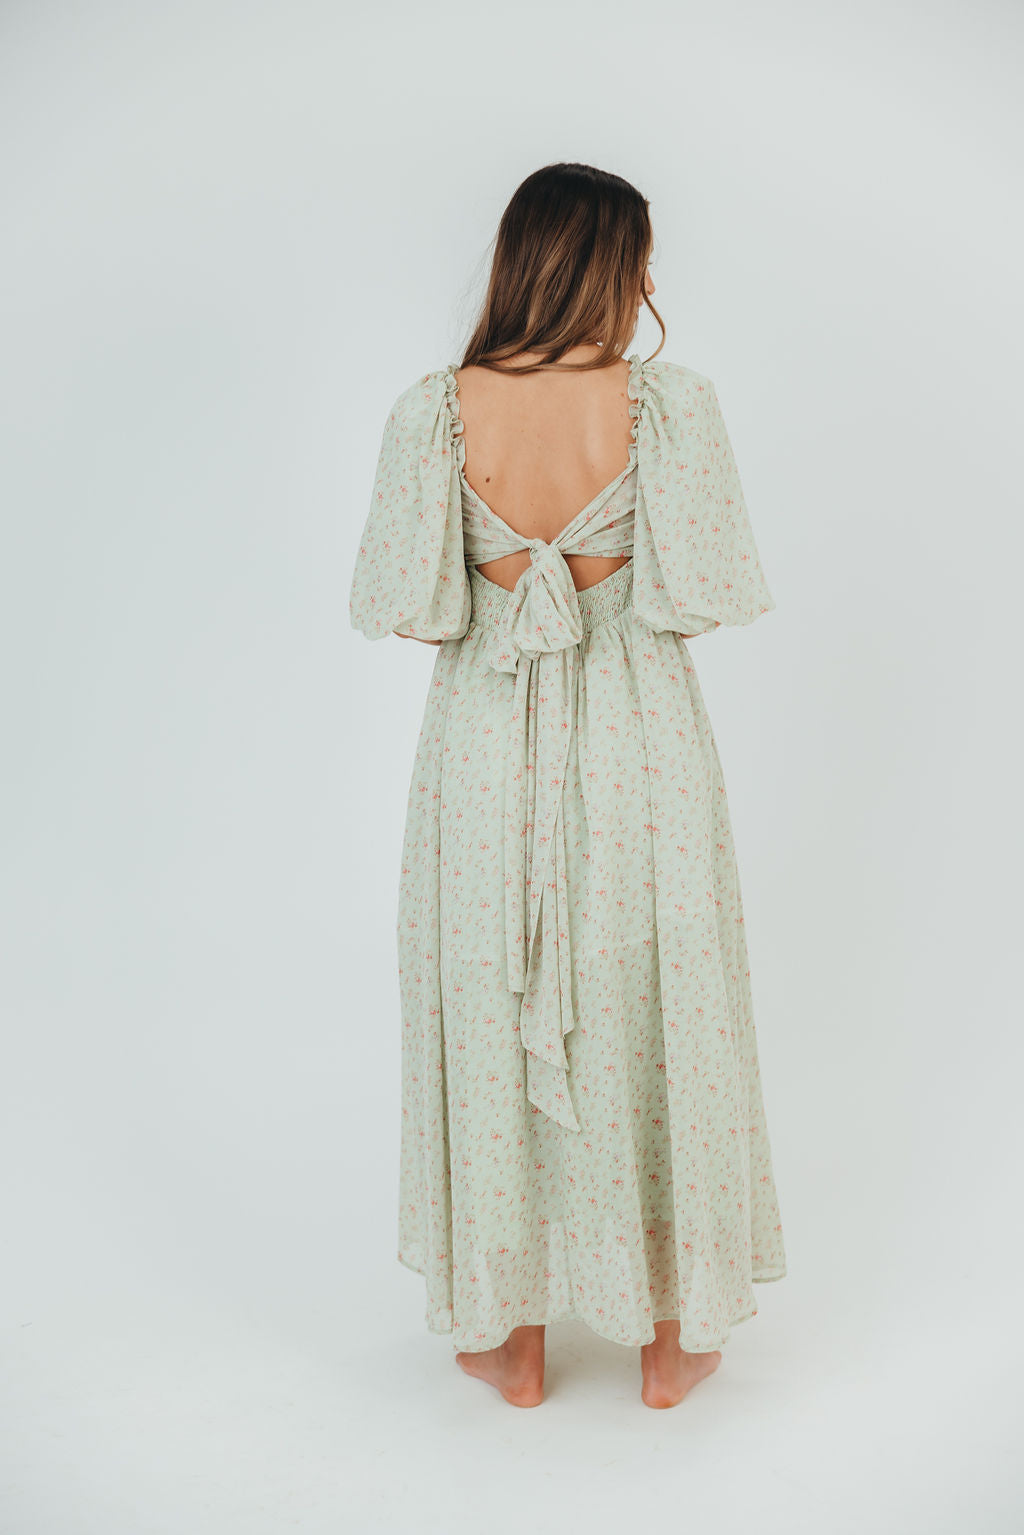 Melody Maxi Dress with Pleats and Bow Detail in Mint Floral - Bump Friendly & Inclusive Sizing (S-3XL) $30 OFF THIS WEEK